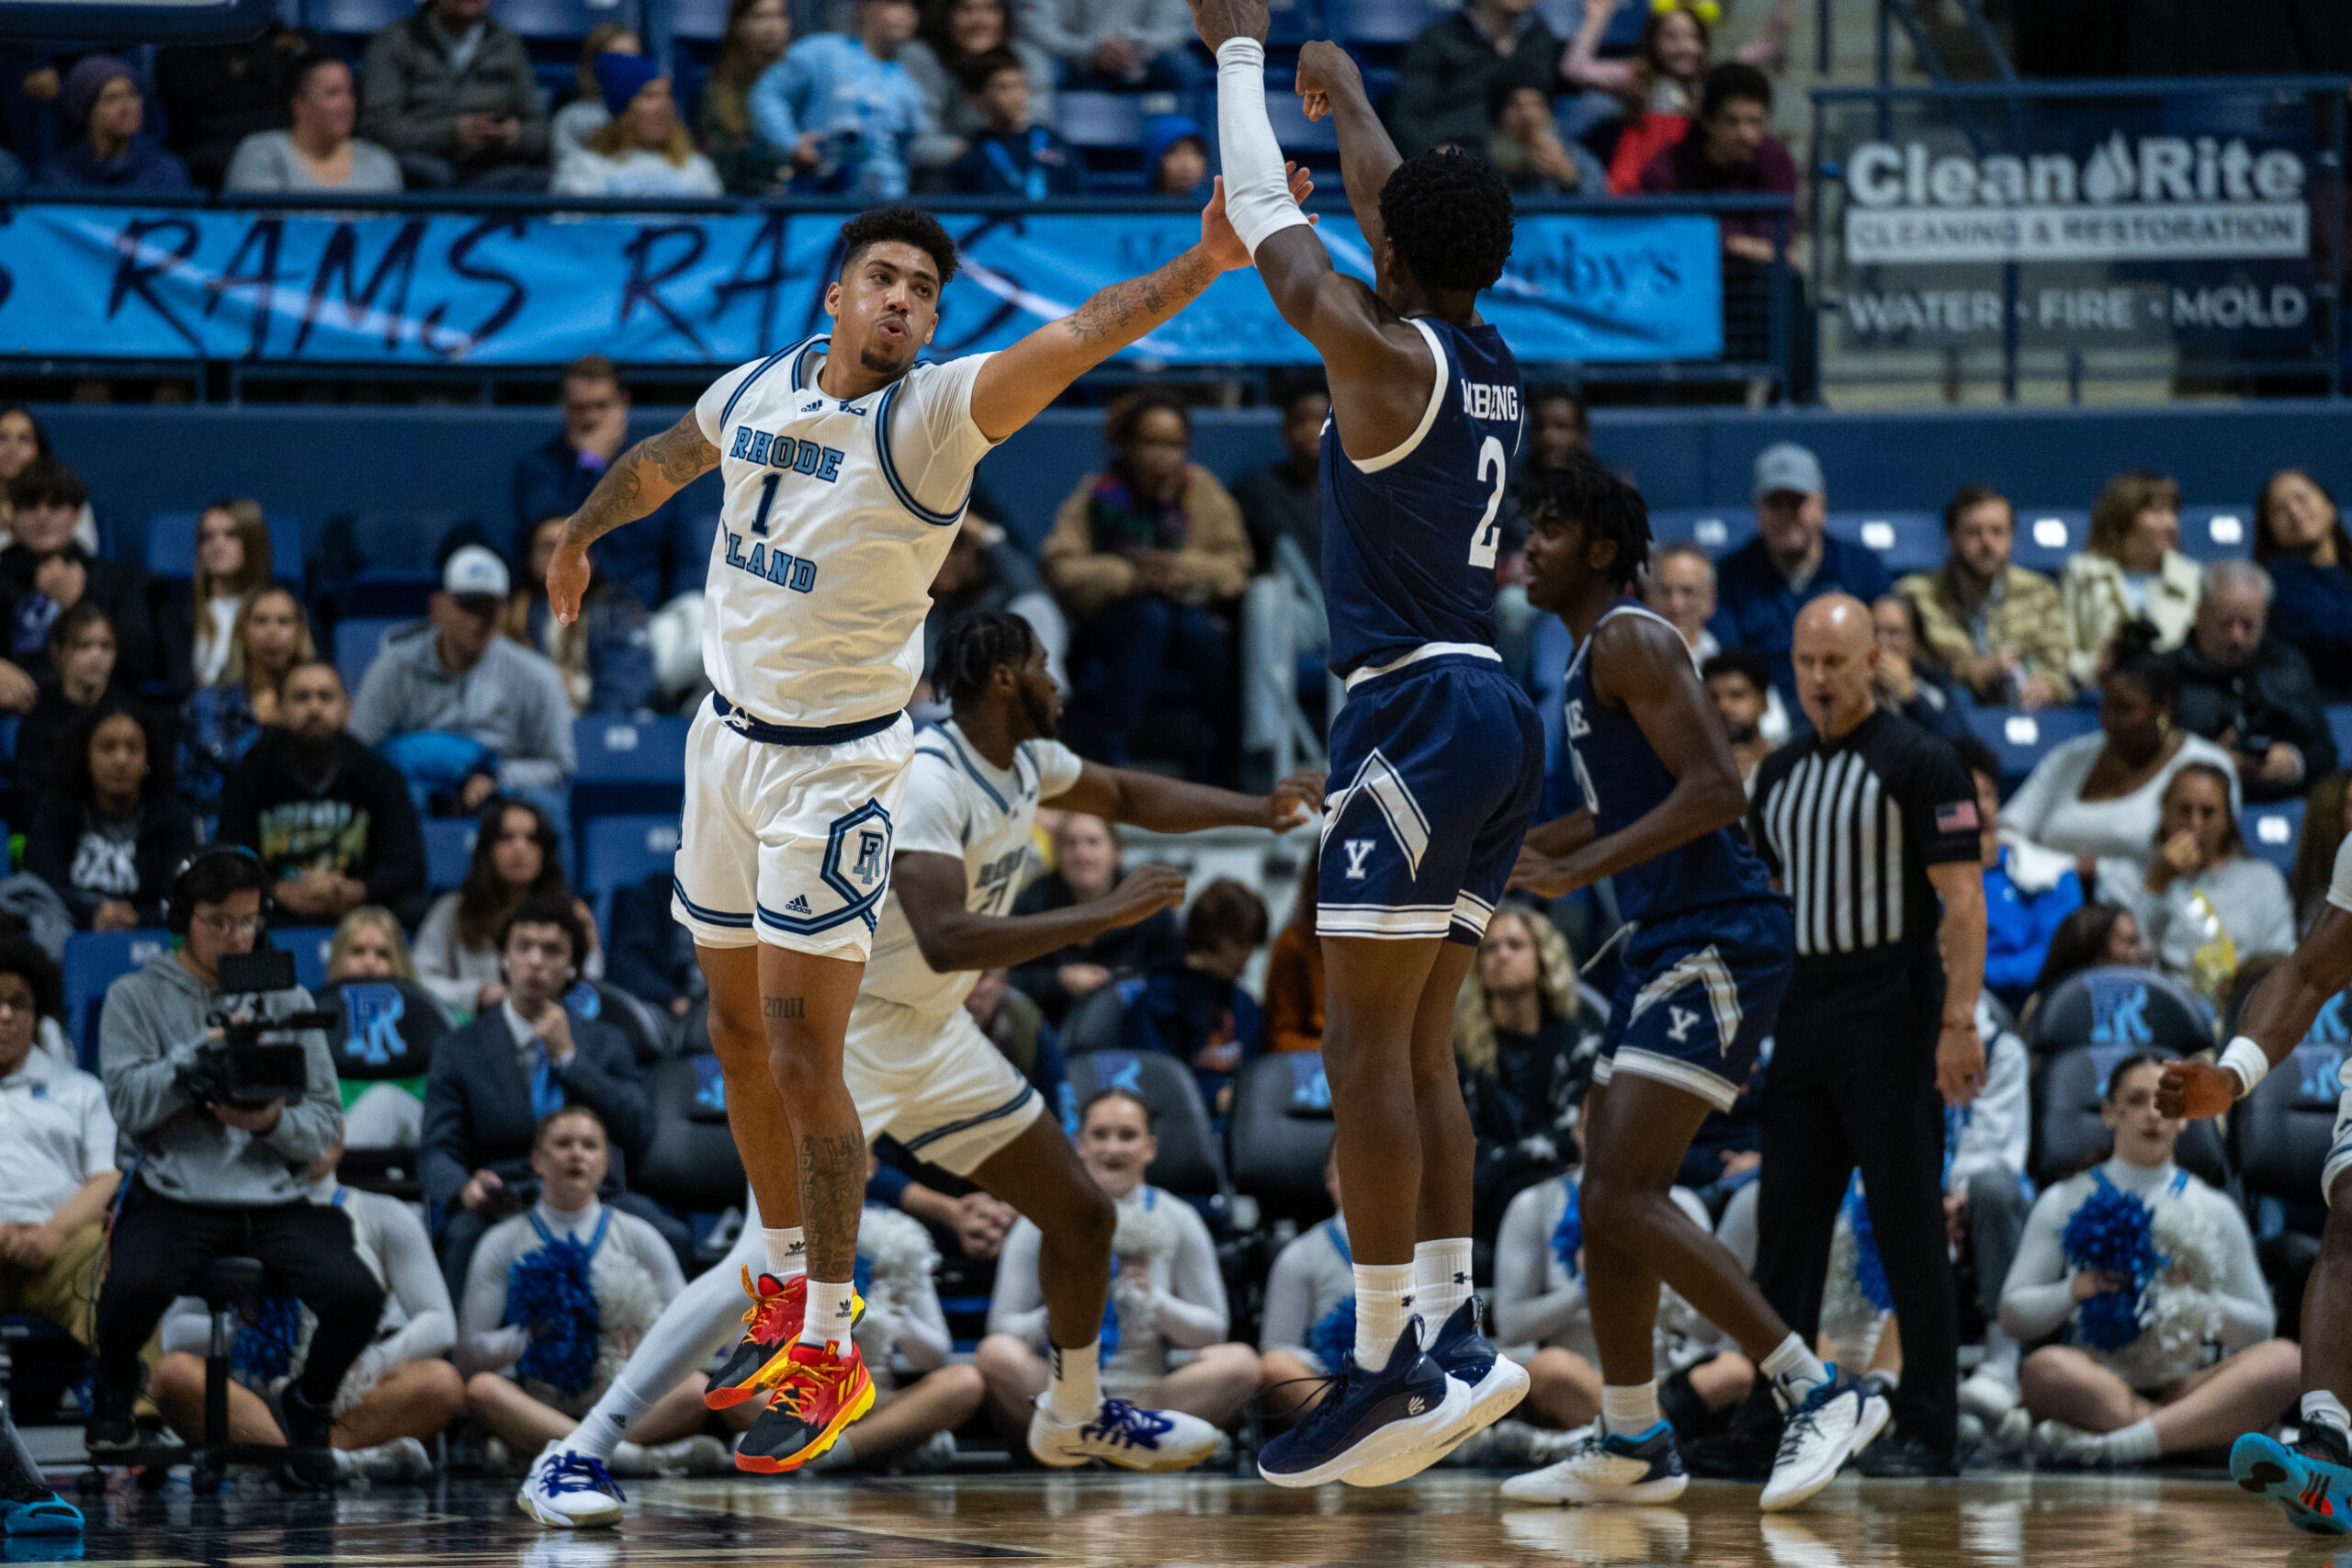 Rhody pushes back and grabs win away from Yale – trip to Providence up next